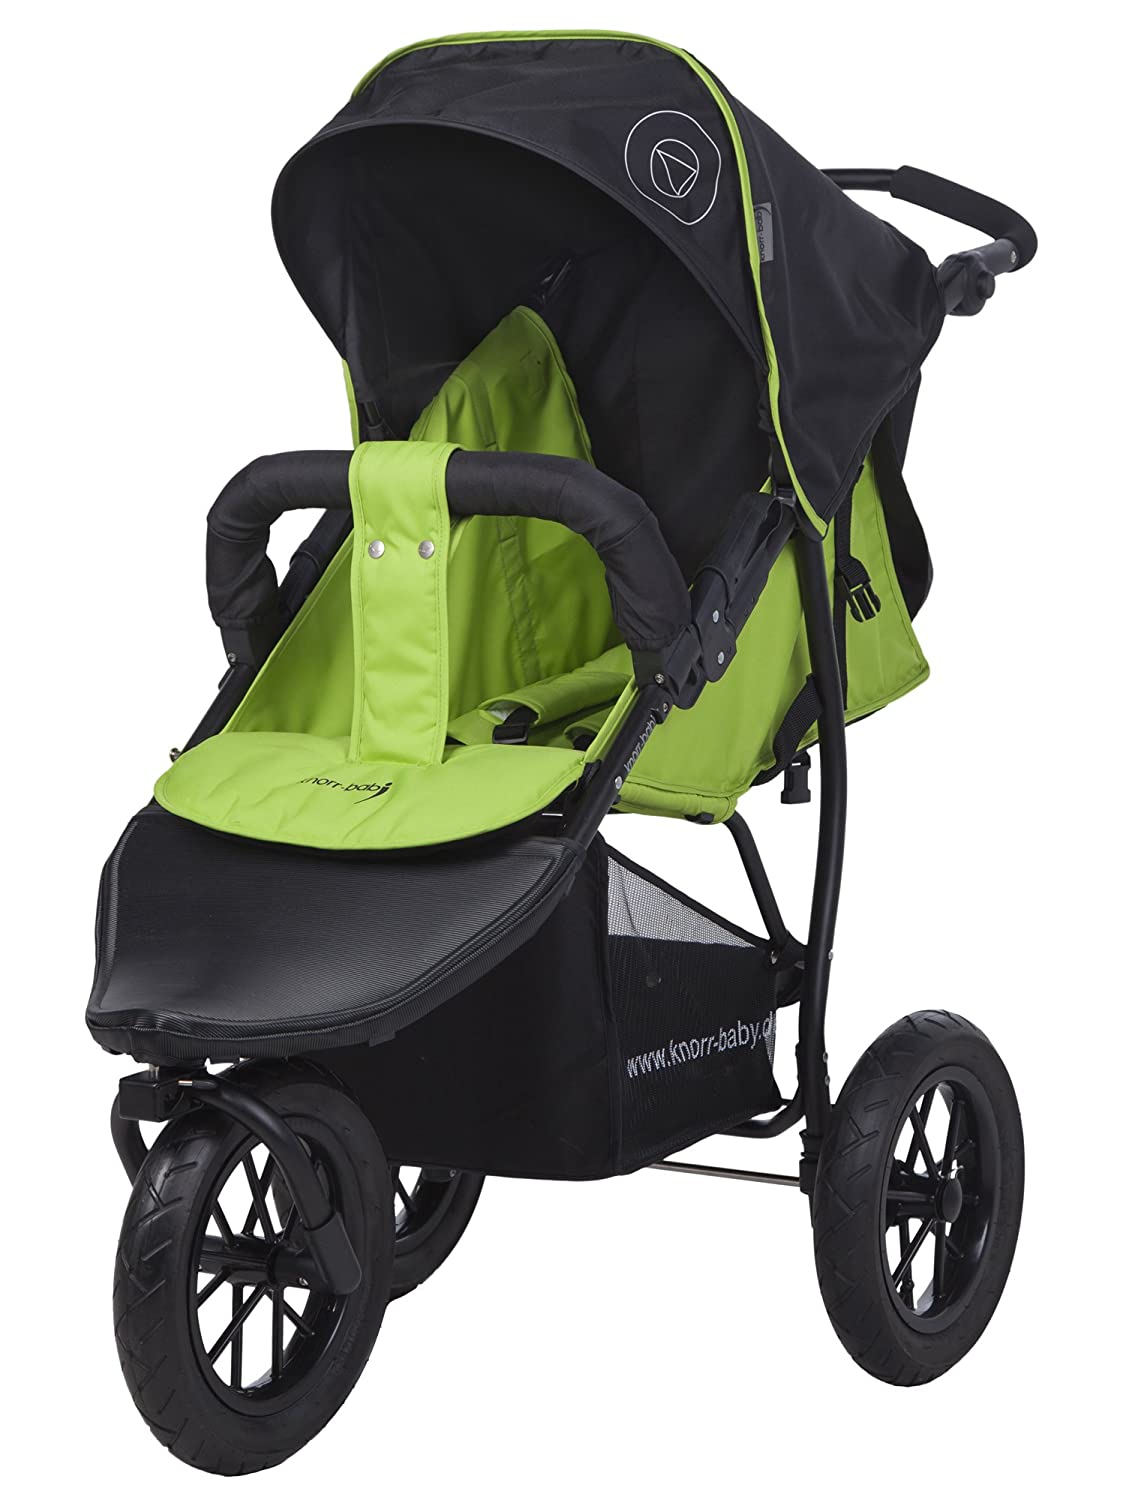 Knorr-baby Tricycle Jogging Pushchair S “Happy Colour” with Slumber Top Joggy S Green